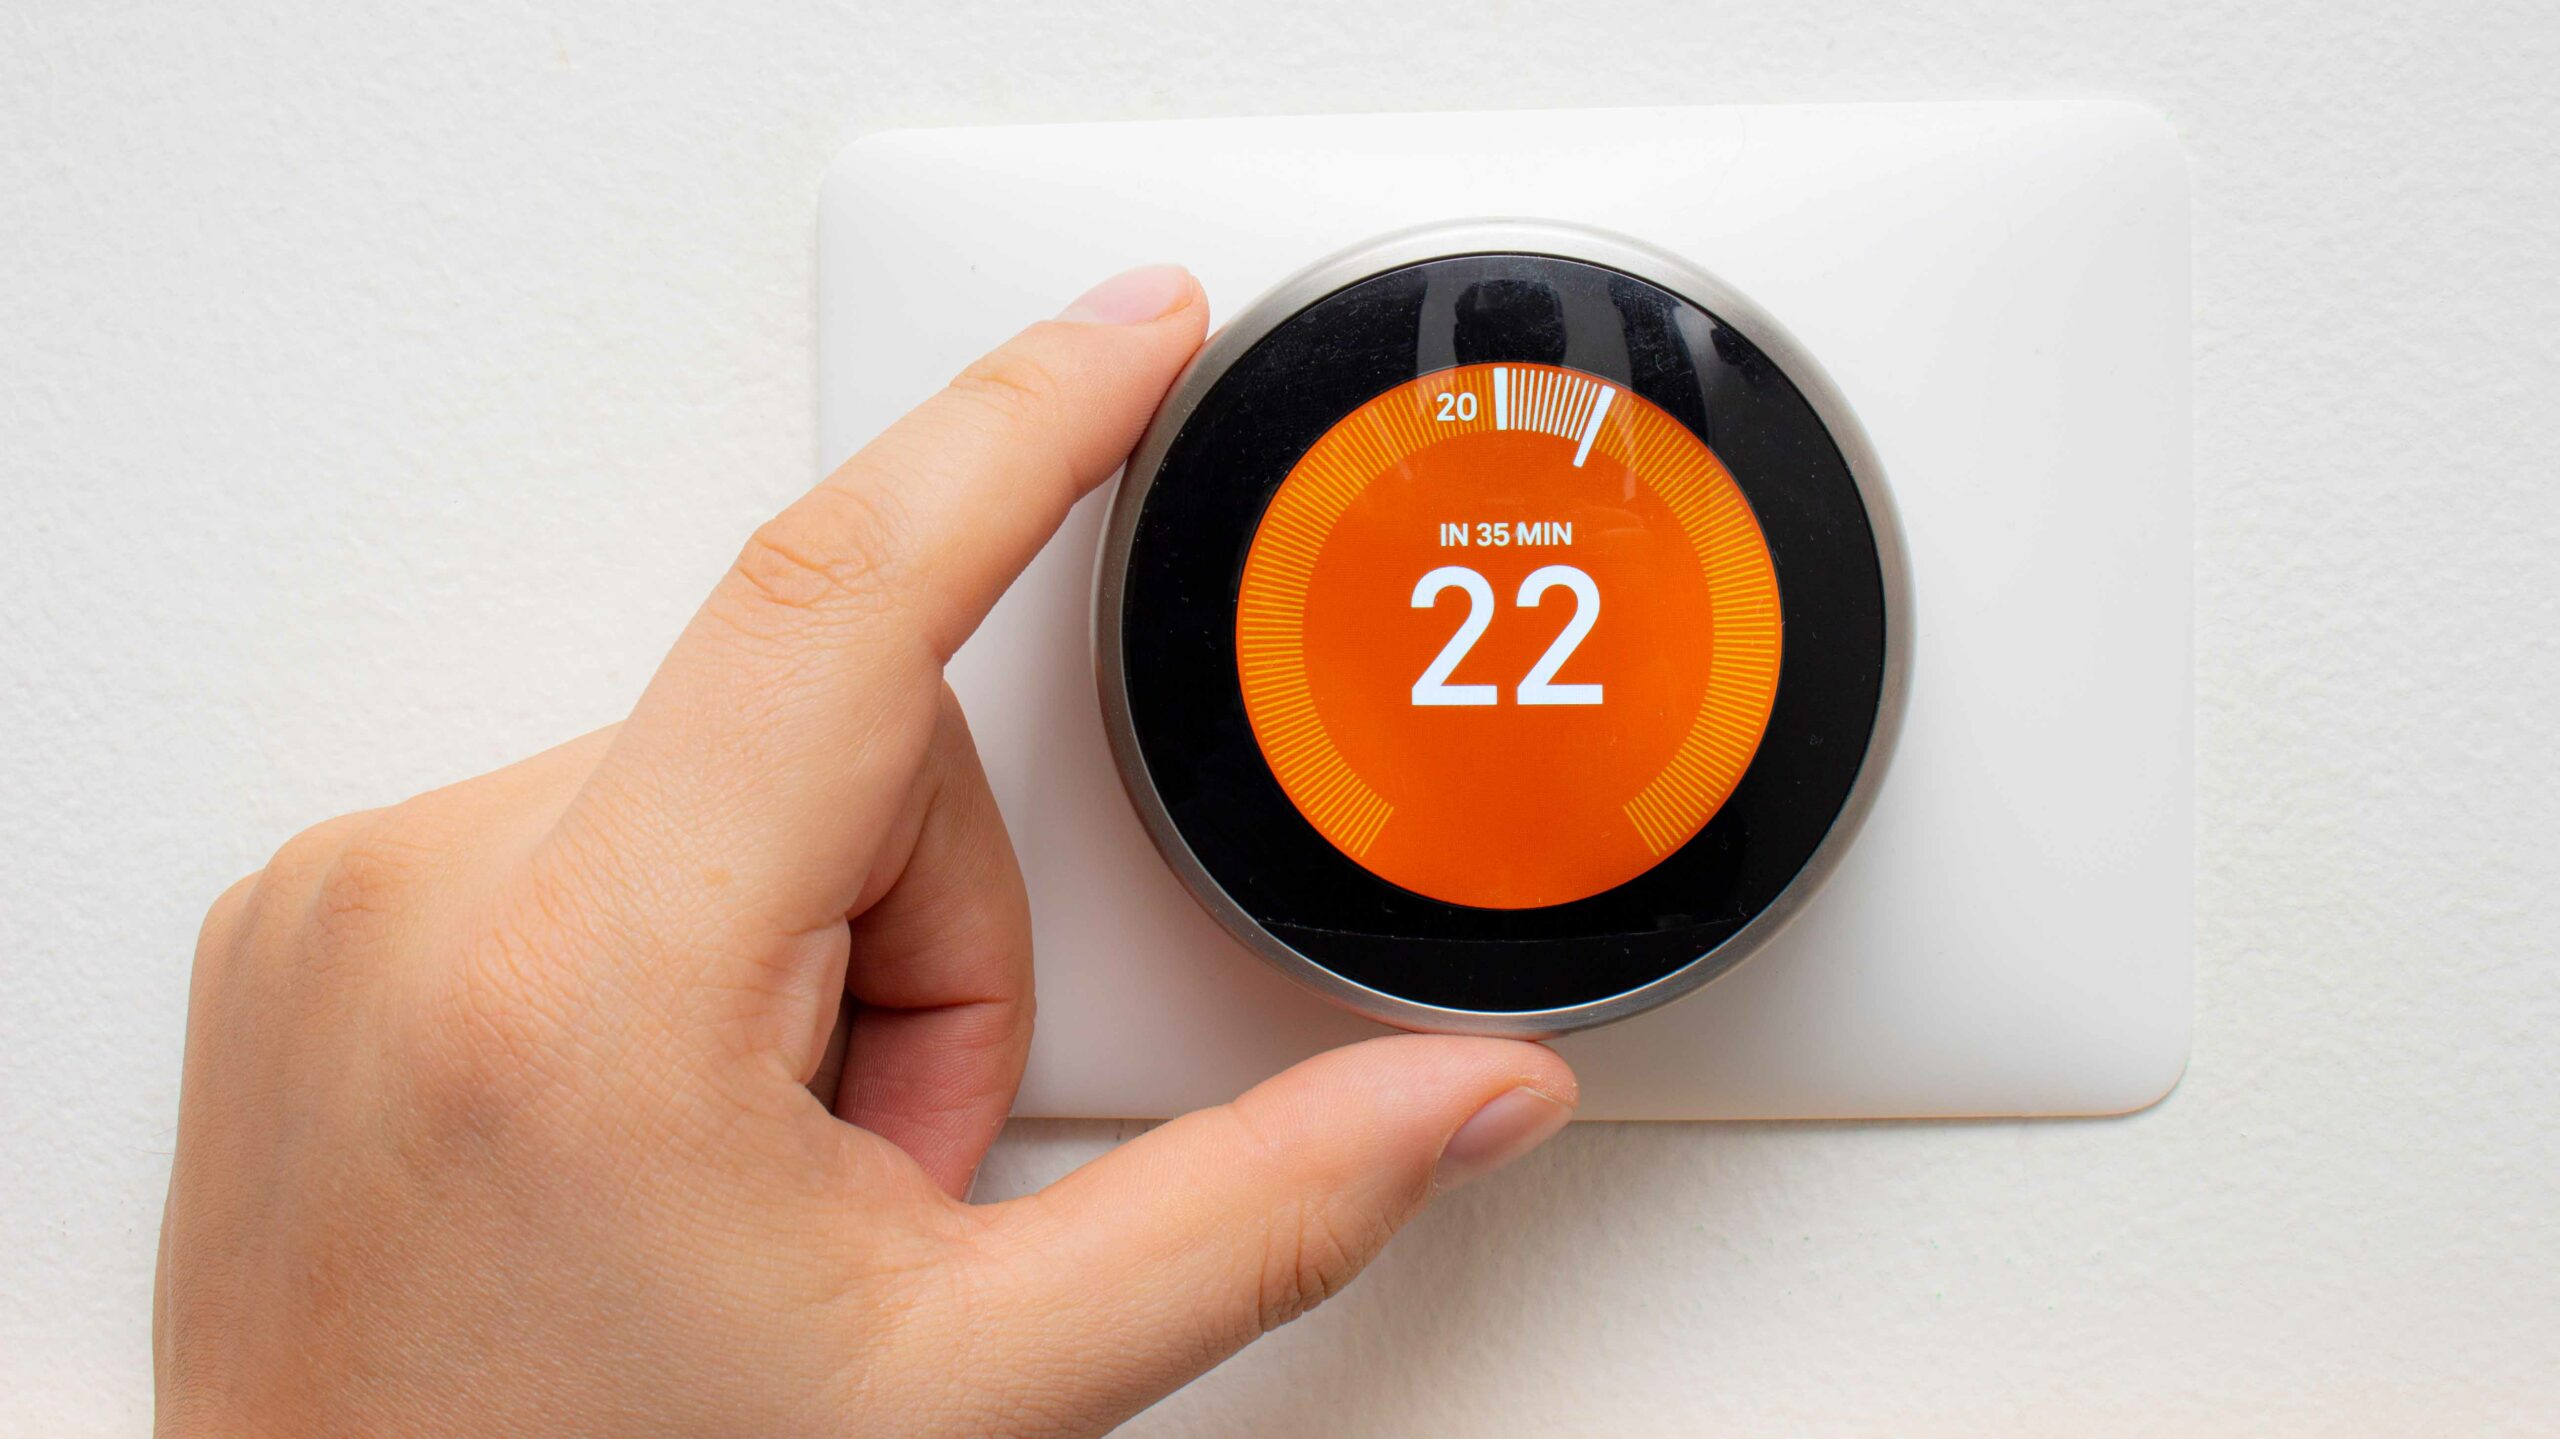 ontario-s-government-is-giving-smart-thermostat-users-75-through-new-program